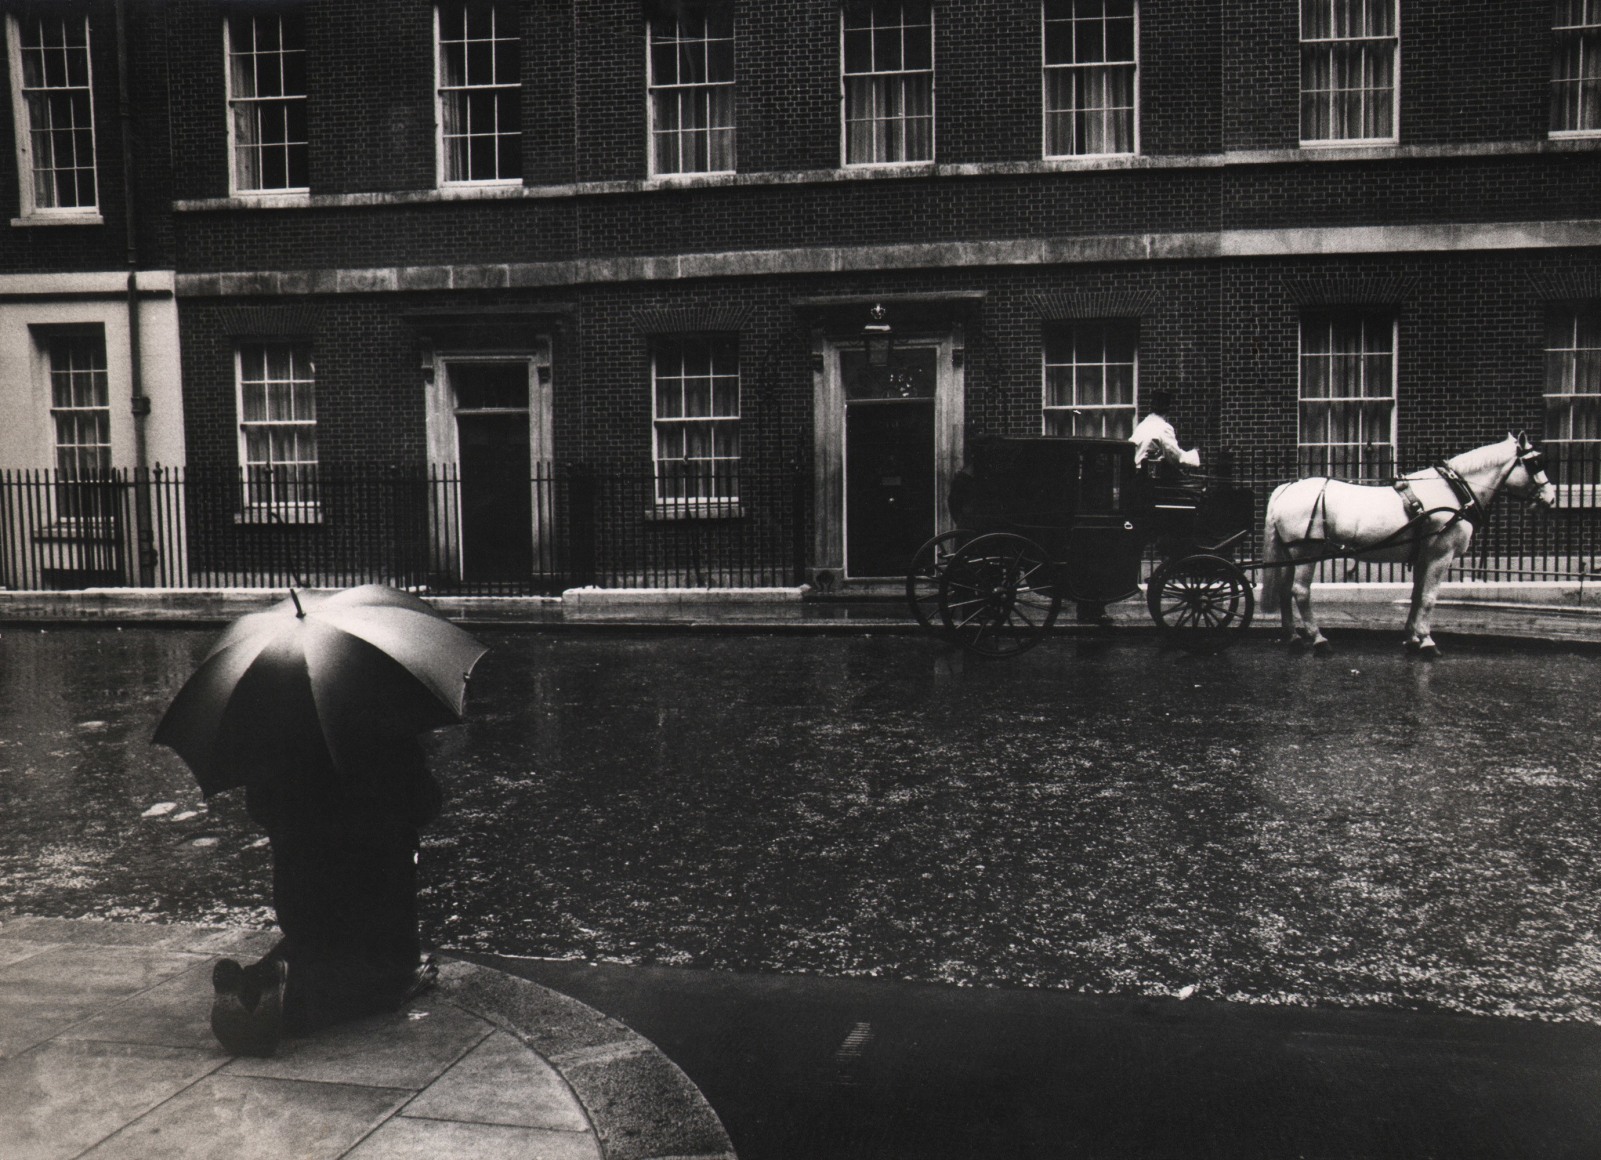 31. David Newell Smith, The man in Downing Street was praying for Mr. Wilson who had just become the Prime Minister, ​c. 1966. A figure with an umbrella kneels on the lower left of the frame across the street from a horse-drawn carriage.